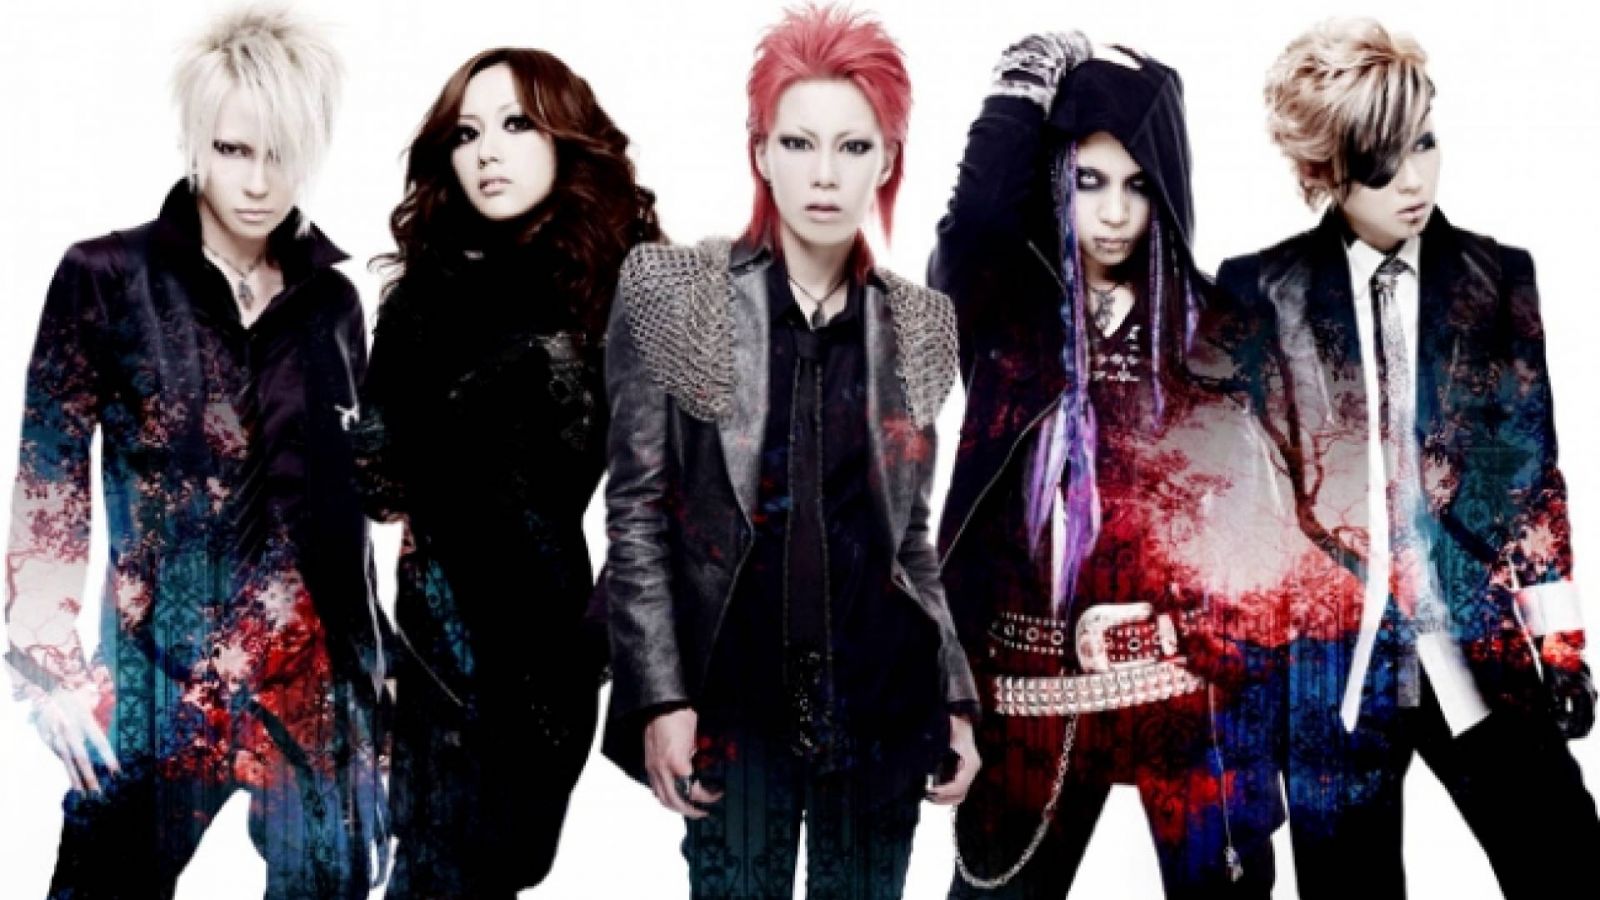 exist†trace und ihr Zwillings-Tor © exist†trace / Monsters, Inc.